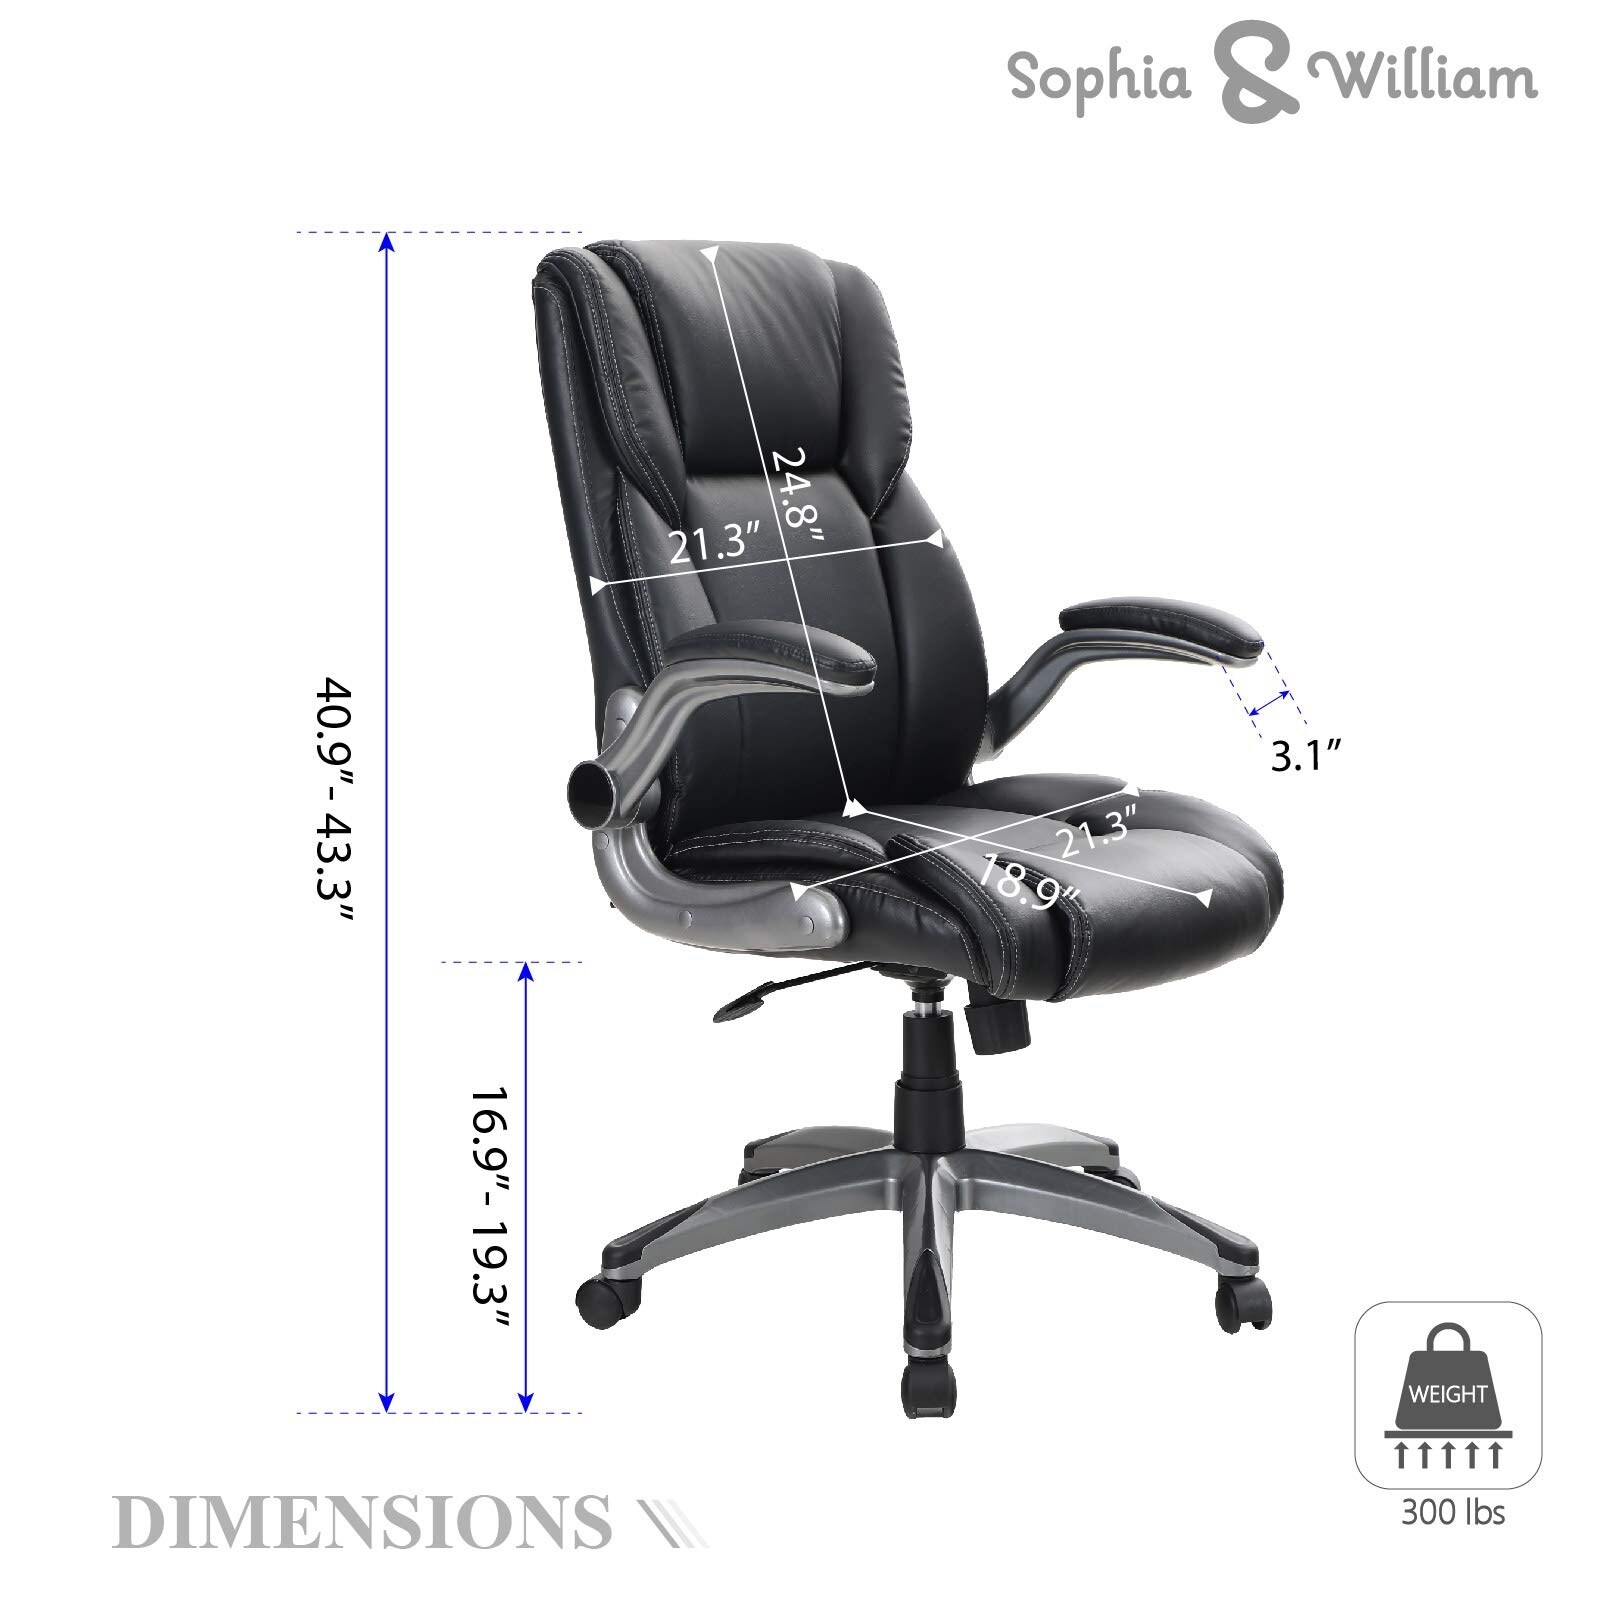 Load Capacity: 300 lbs 1 Pack Modern 360° Swivel Executive Computer Chair with Height Adjustable Armrests Lumbar Support Sophia & William Ergonomic Rocking Mesh Office Desk Chair High Back Black